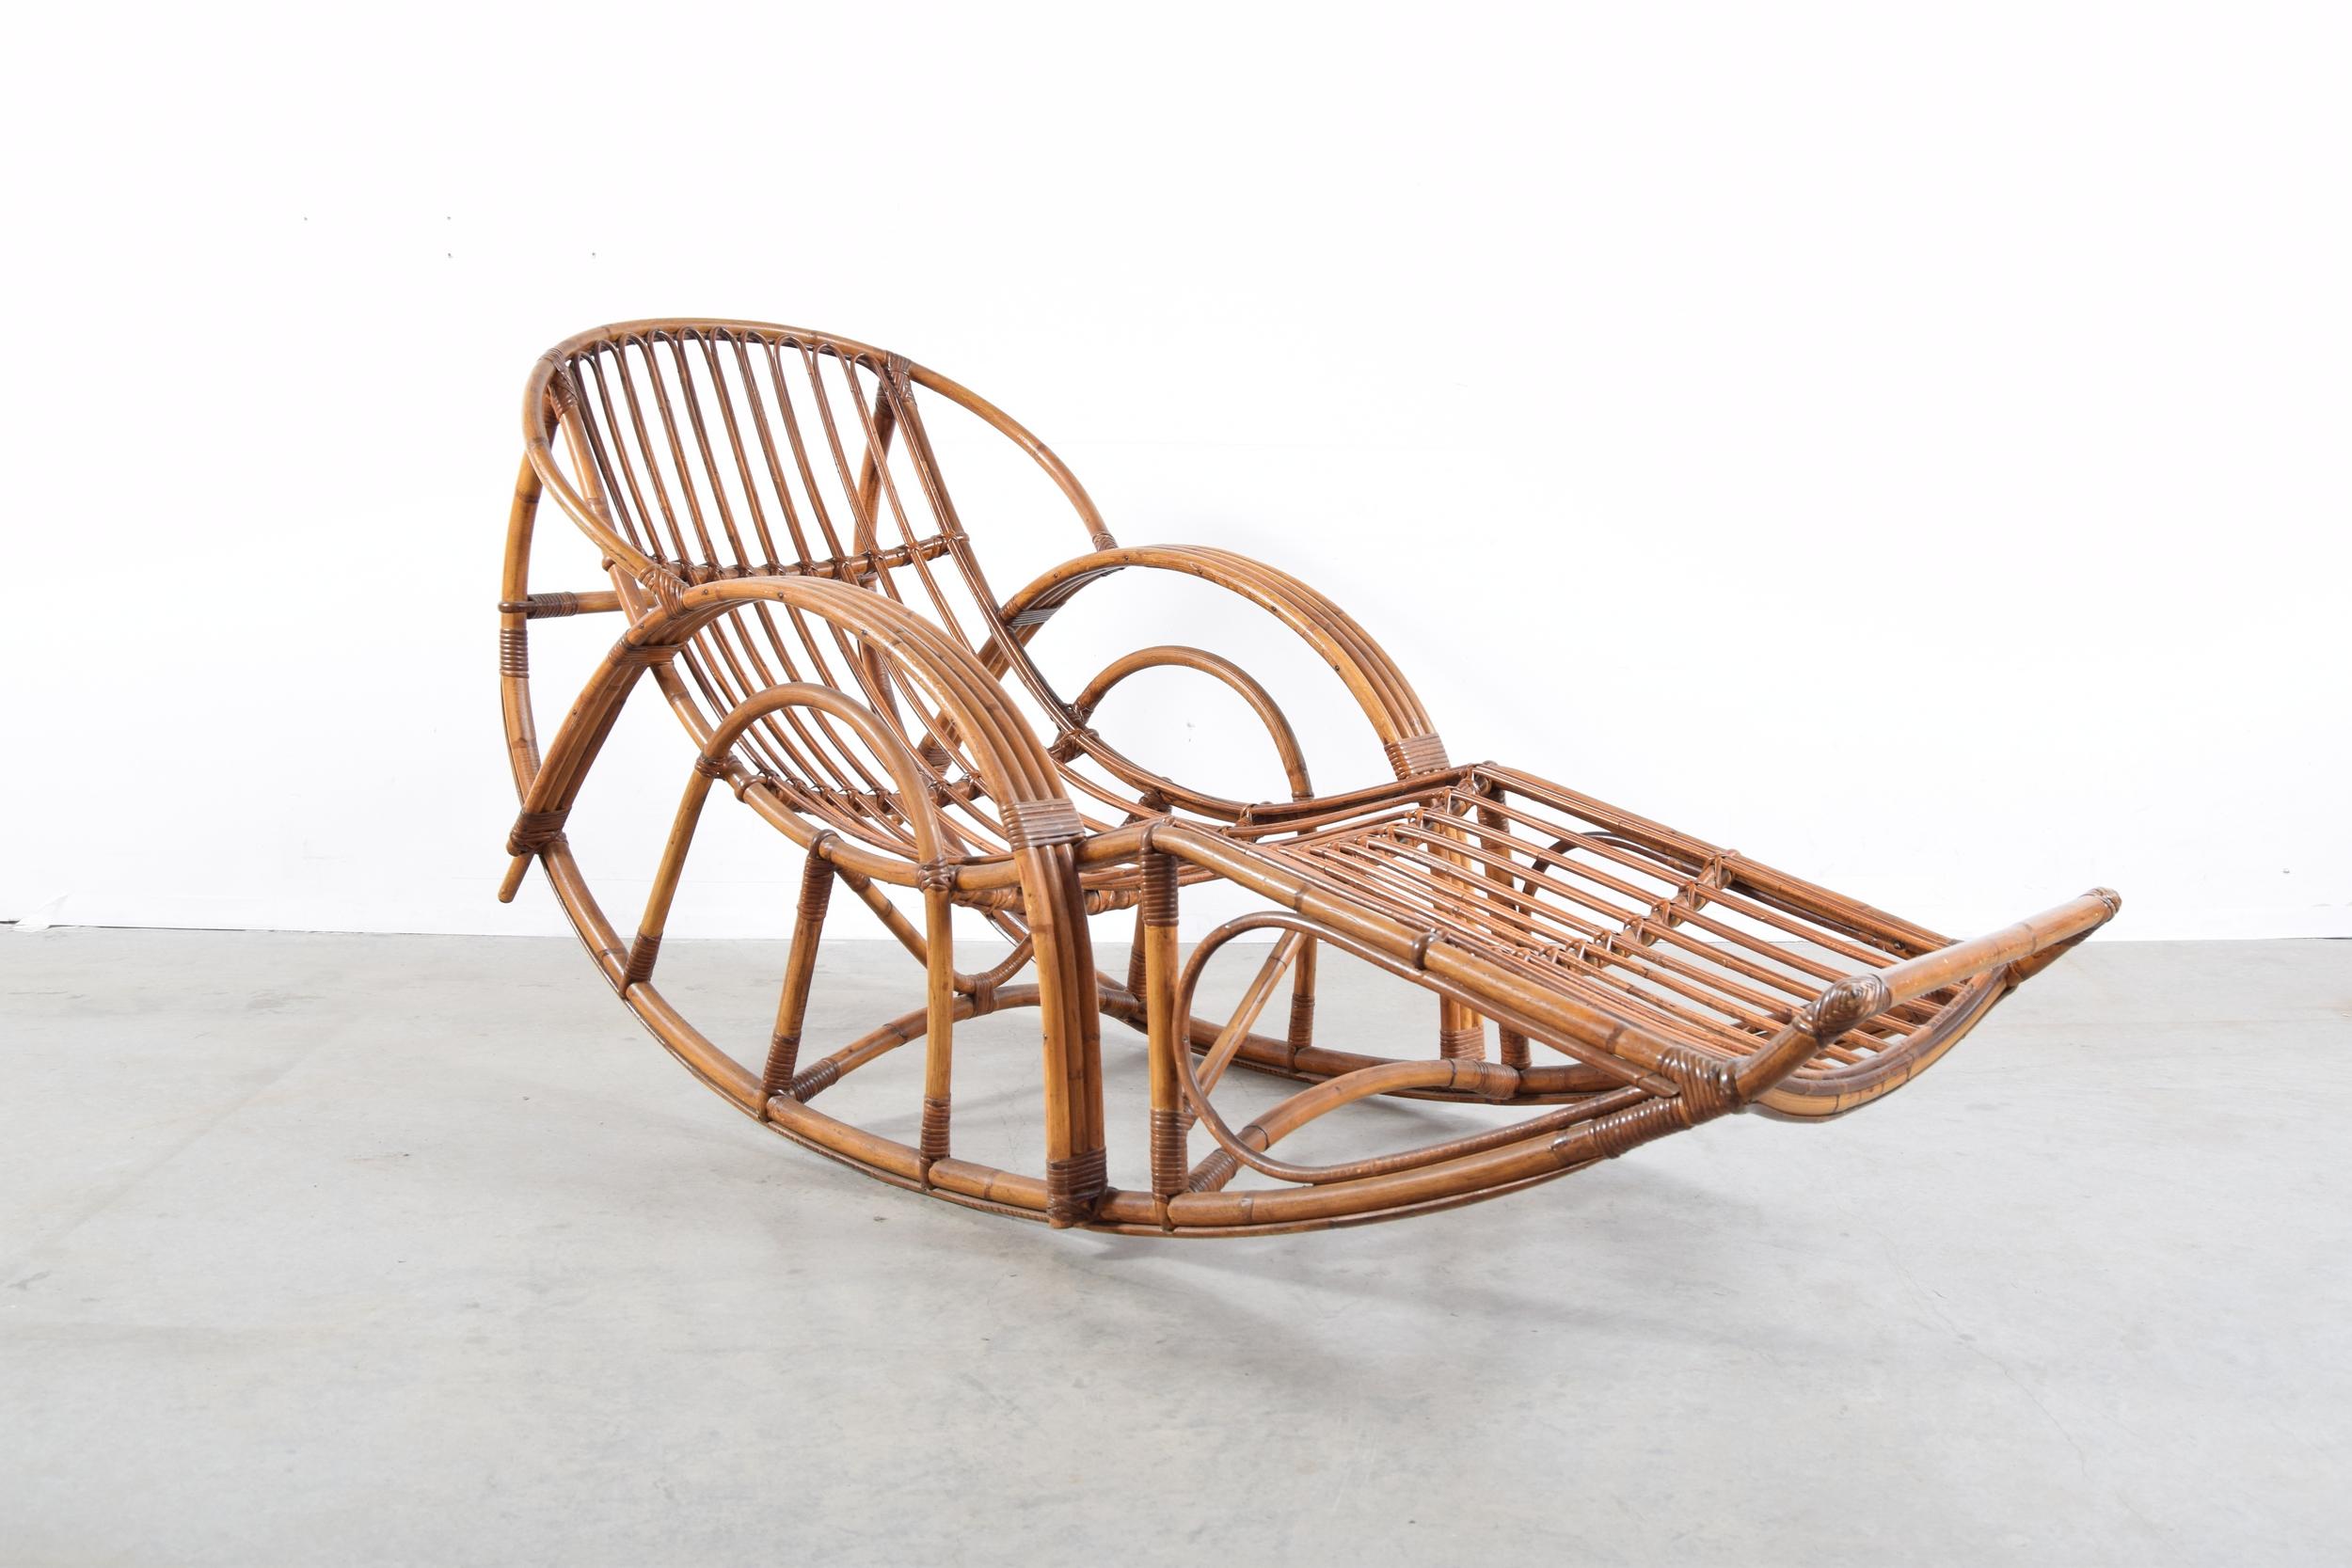 Modernist rattan and bamboo rocking chaise, circa 1955. Amazing original condition. Made in Italy.